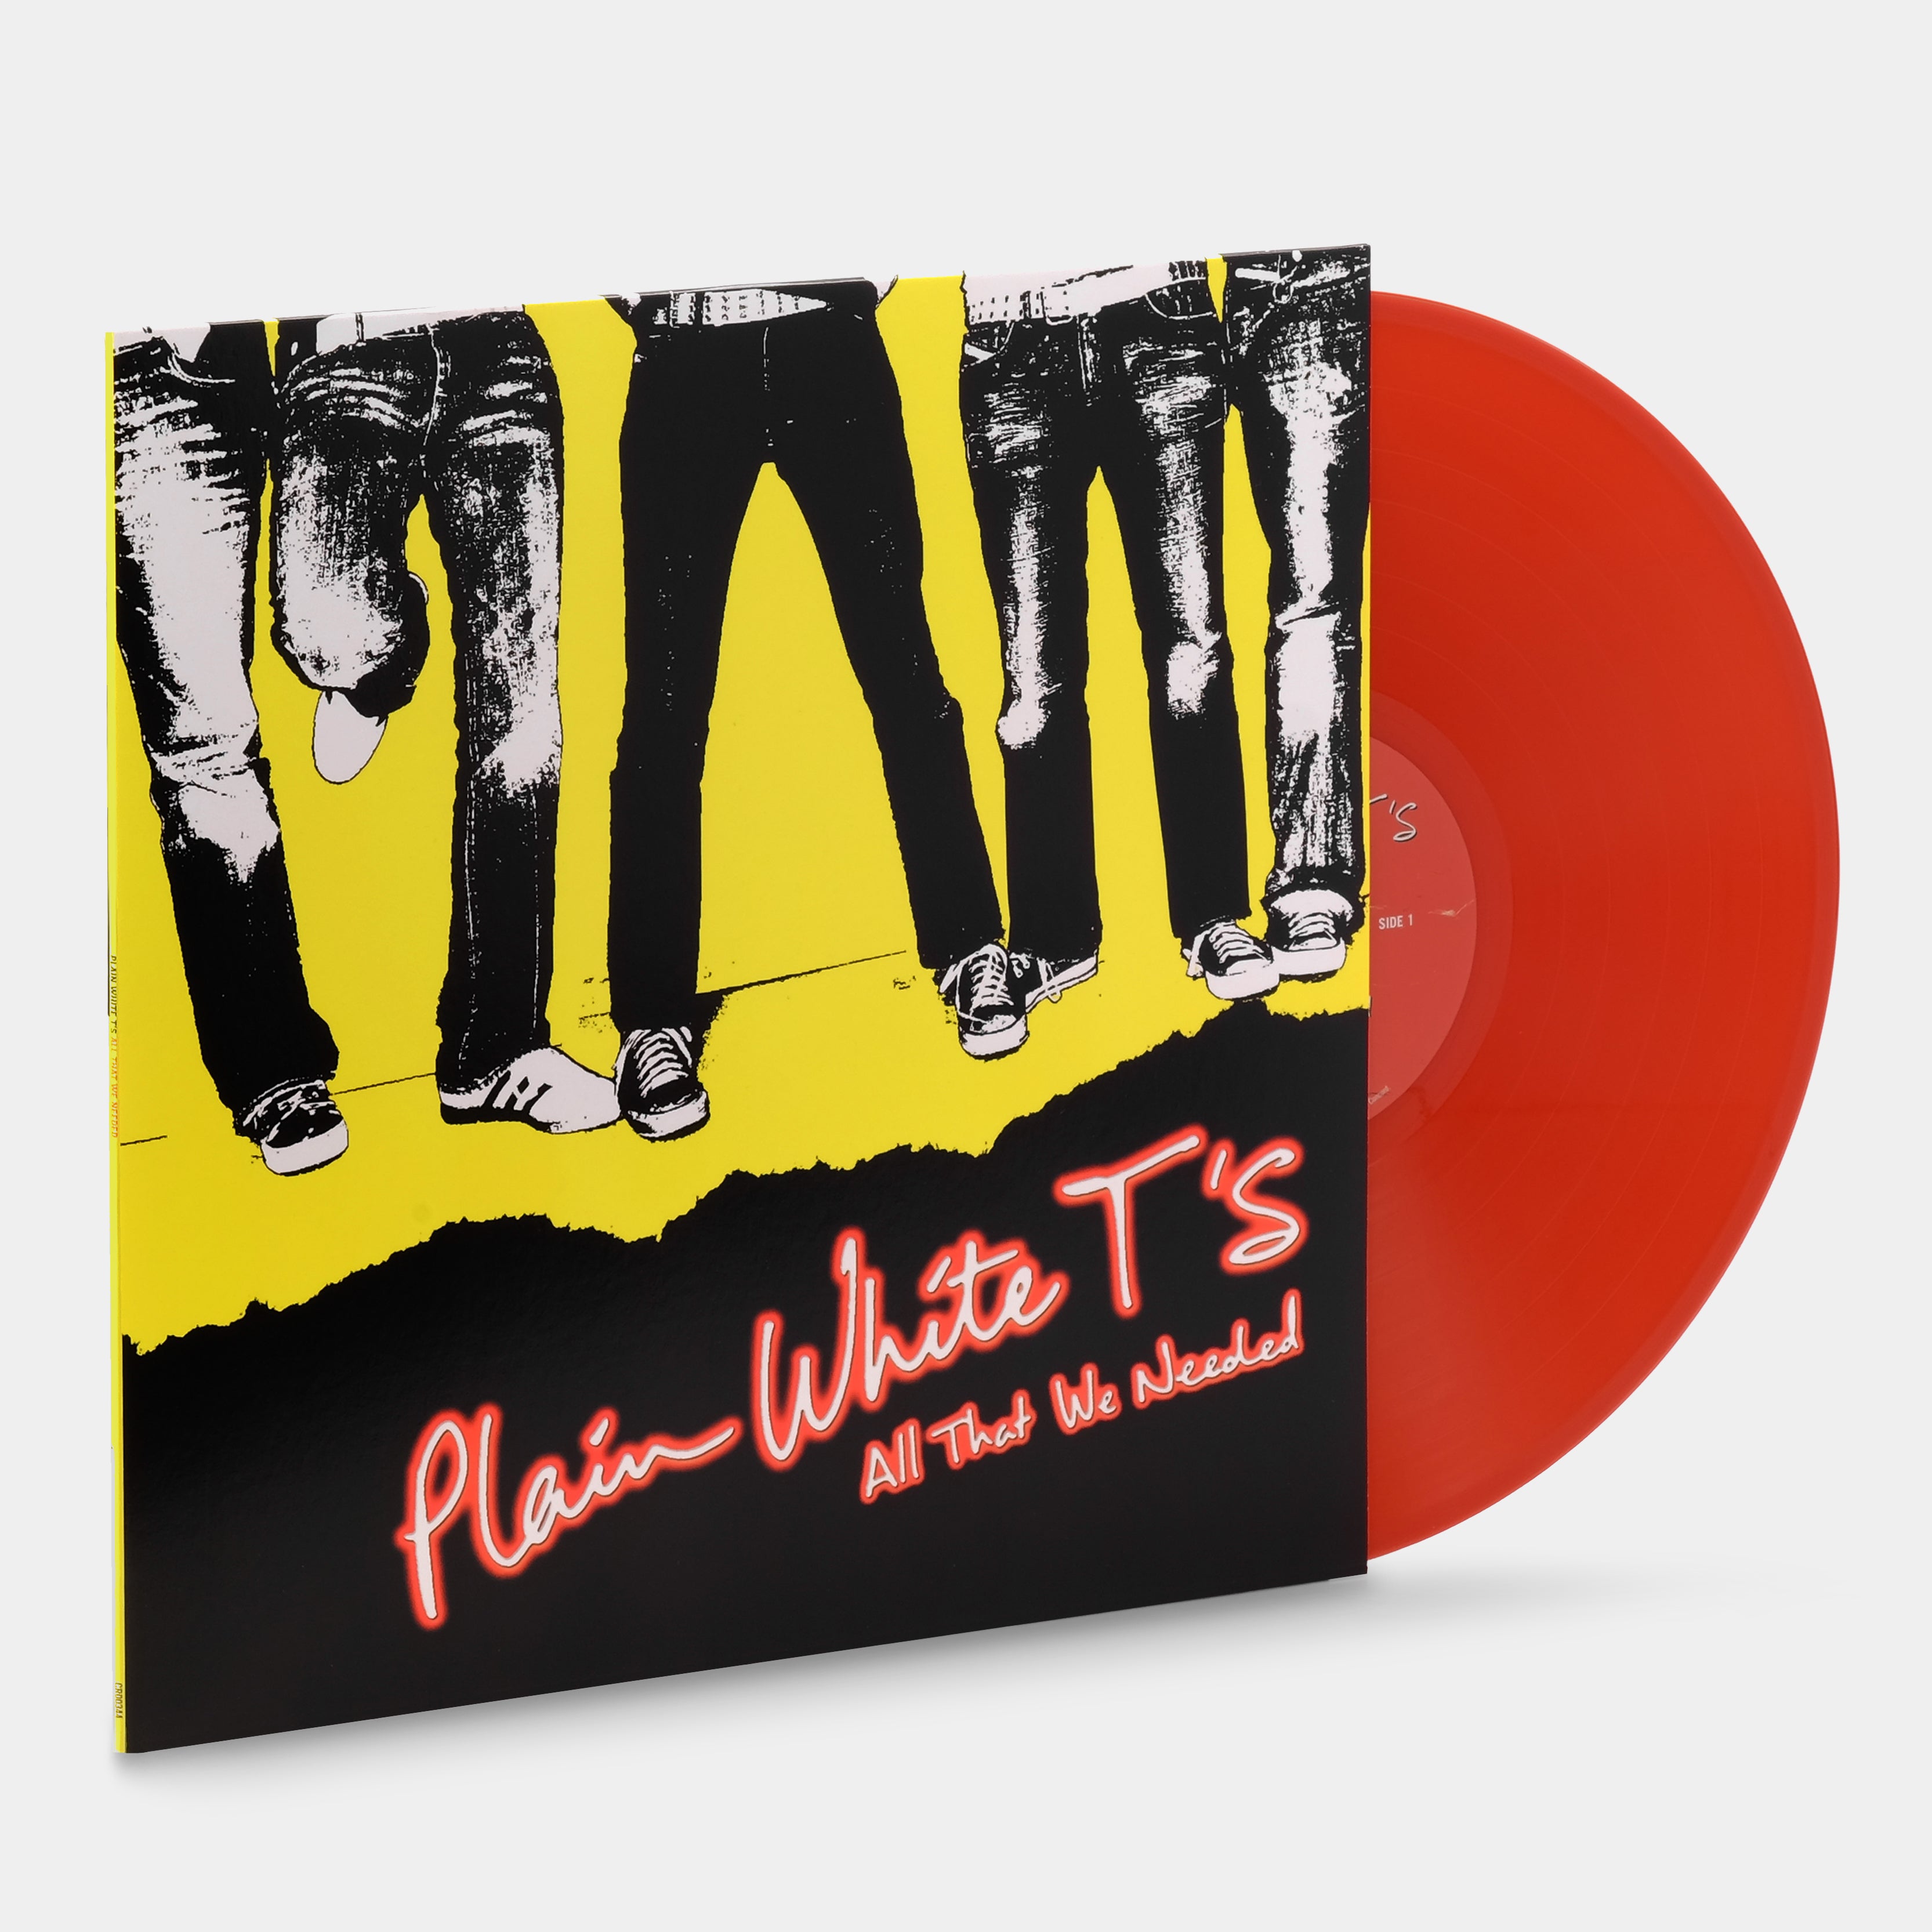 Plain White T's - All That We Needed LP Opaque Red Vinyl Record